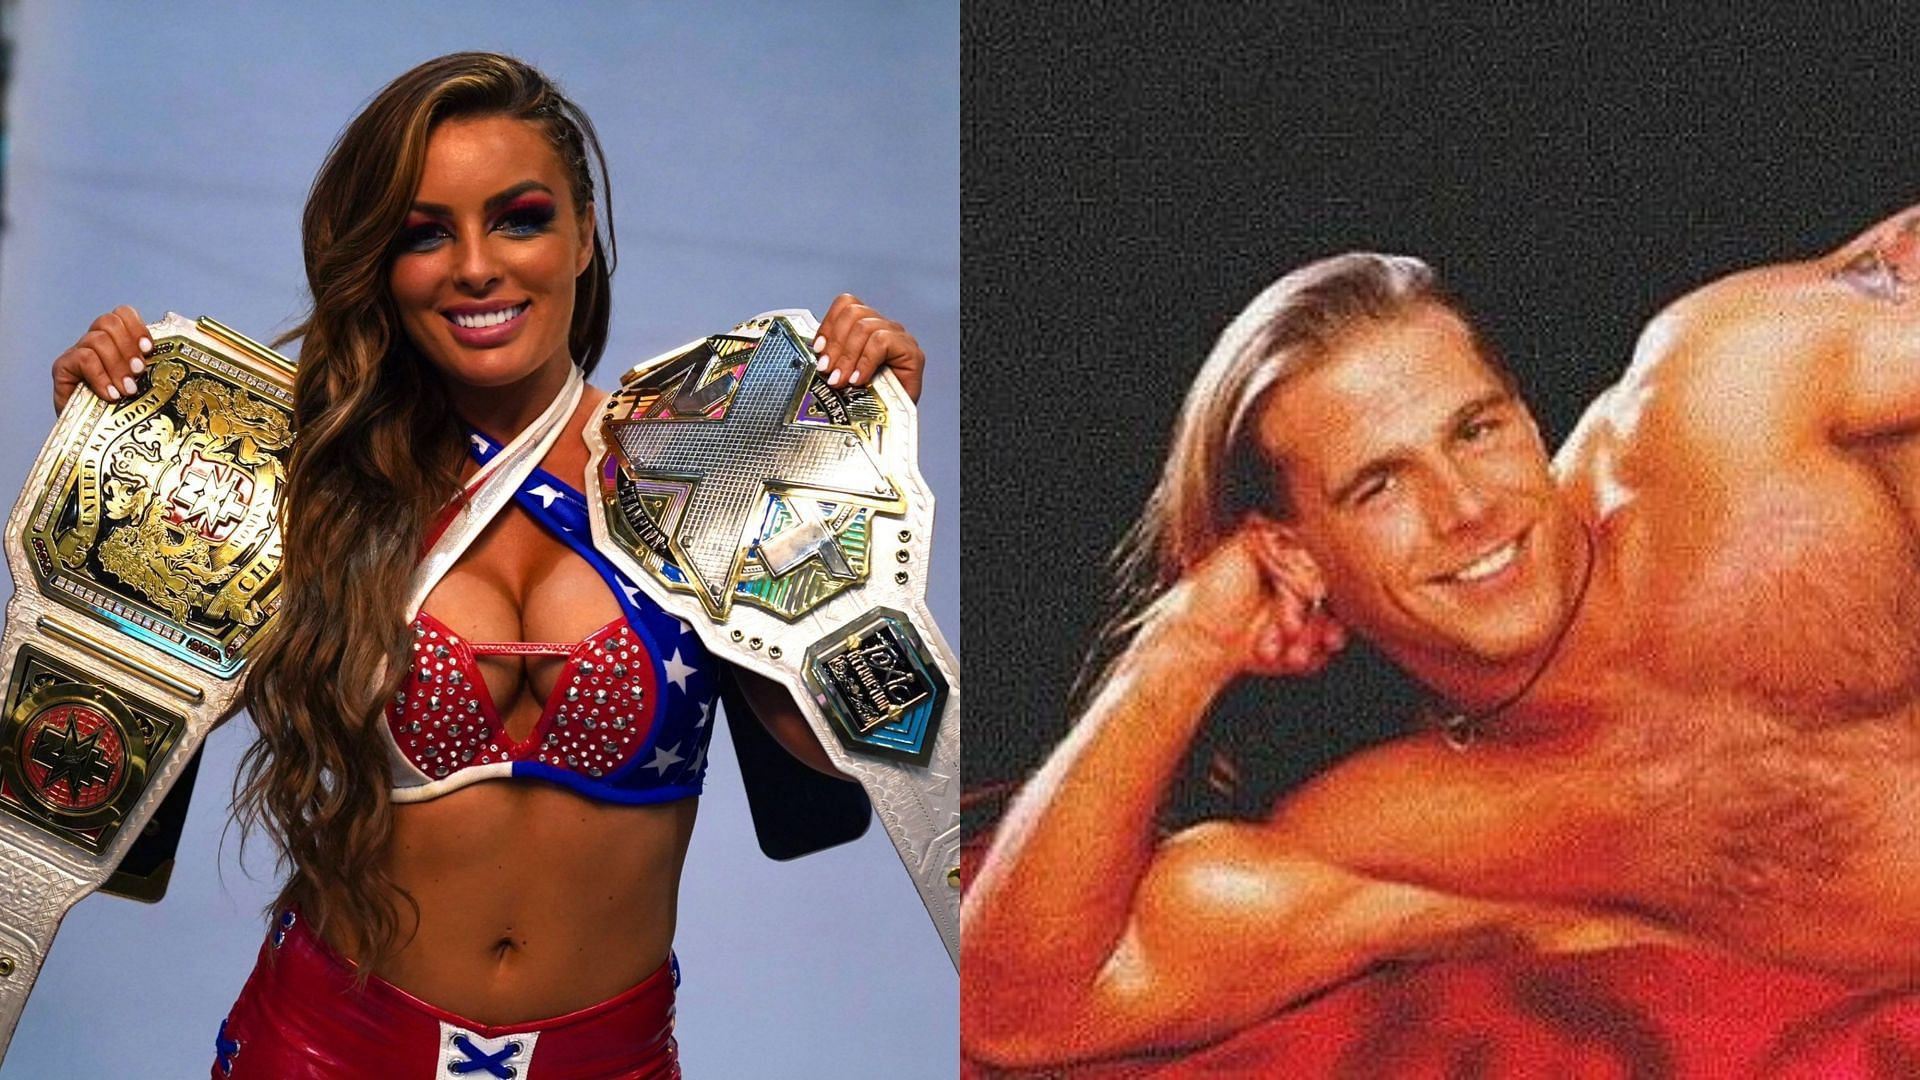 anthony cordingley recommends shawn michaels play girl pic